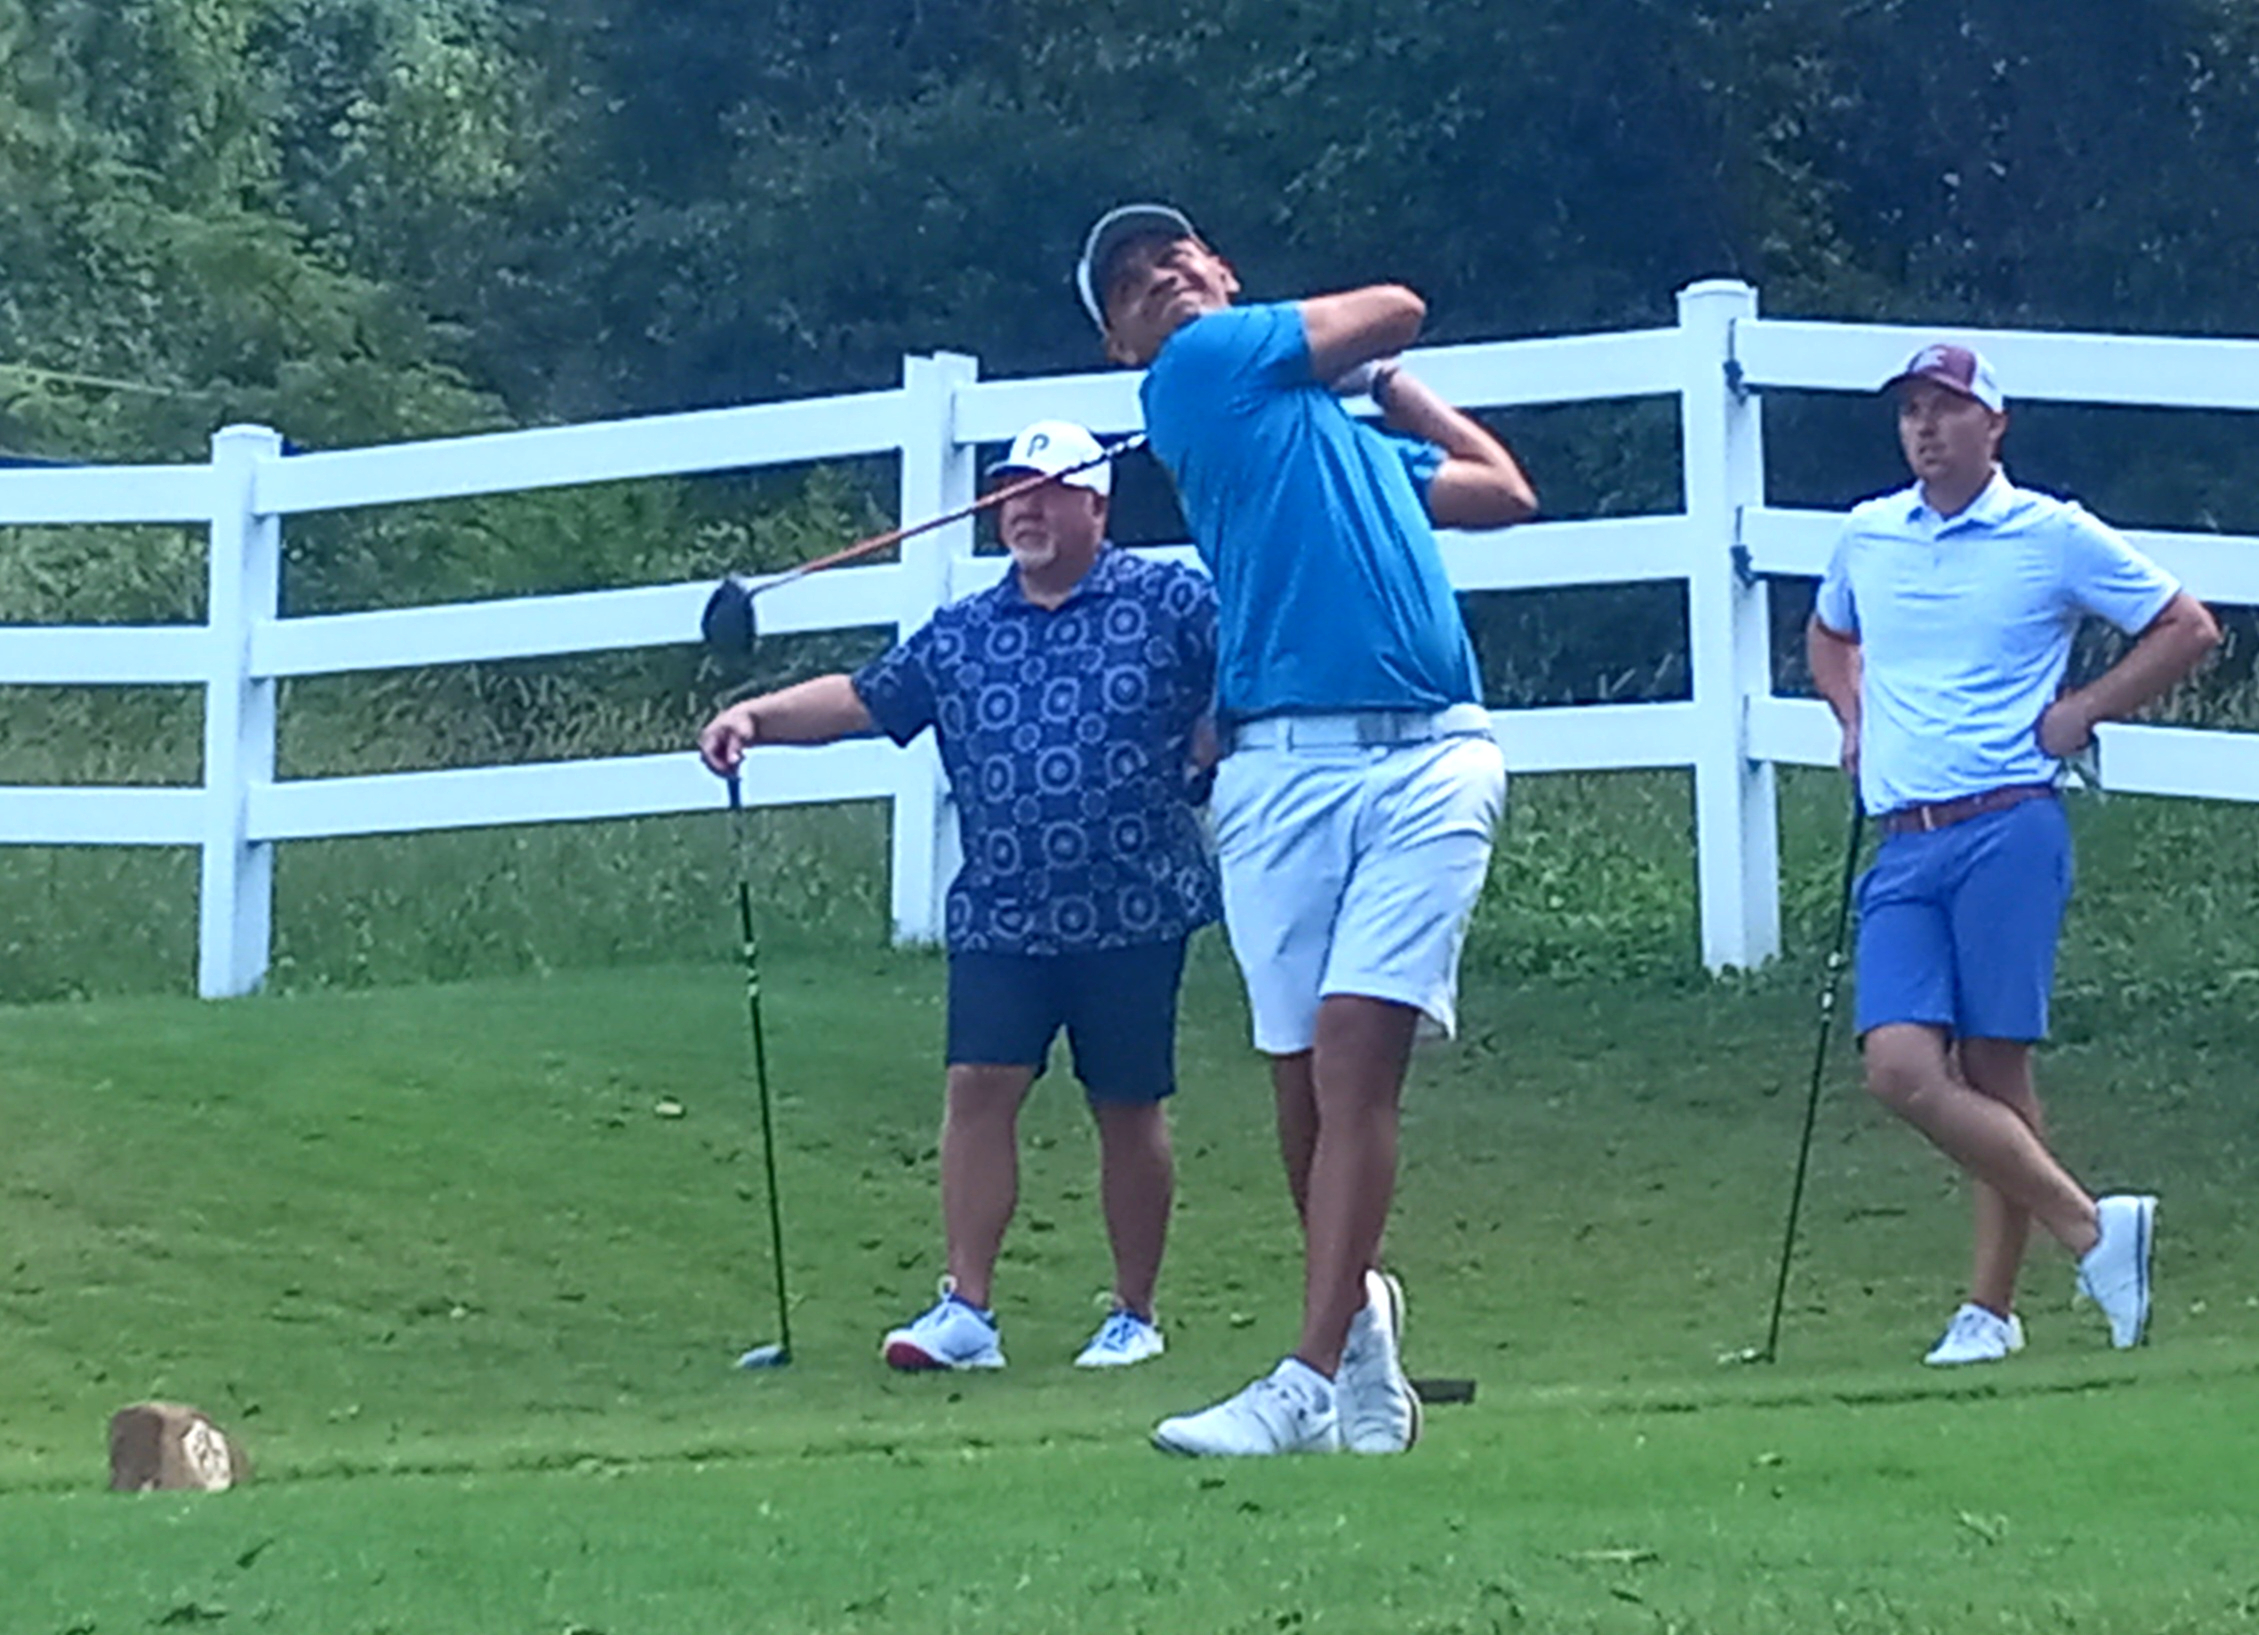 Jesus Montenegro tees off on Anniston Country Club’s No. 7 hole as teammate Layton Bussey (right) and Benji Turley watch during Sunday’s final round of the Sunny King Charity Classic. (Photo by Joe Medley/East Alabama Sports Today)